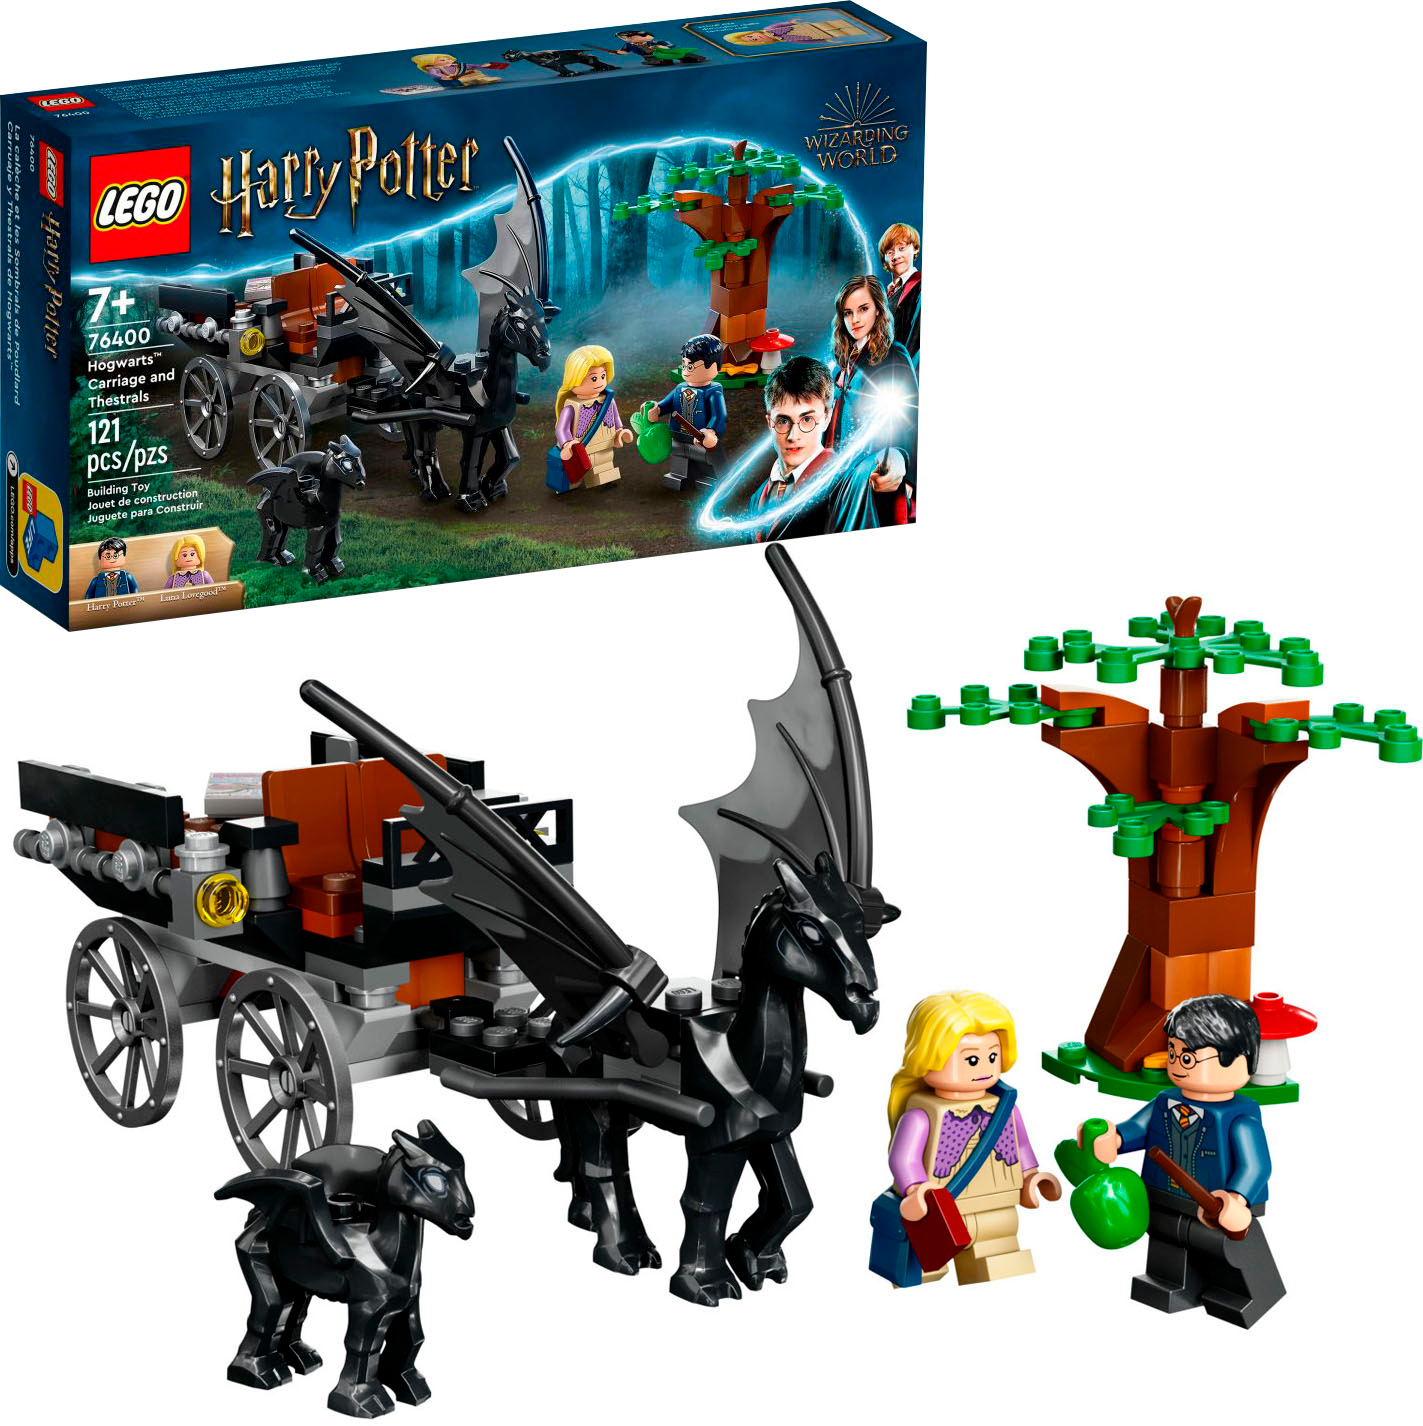 LEGO Harry Potter Hogwarts and Thestrals - Best Buy